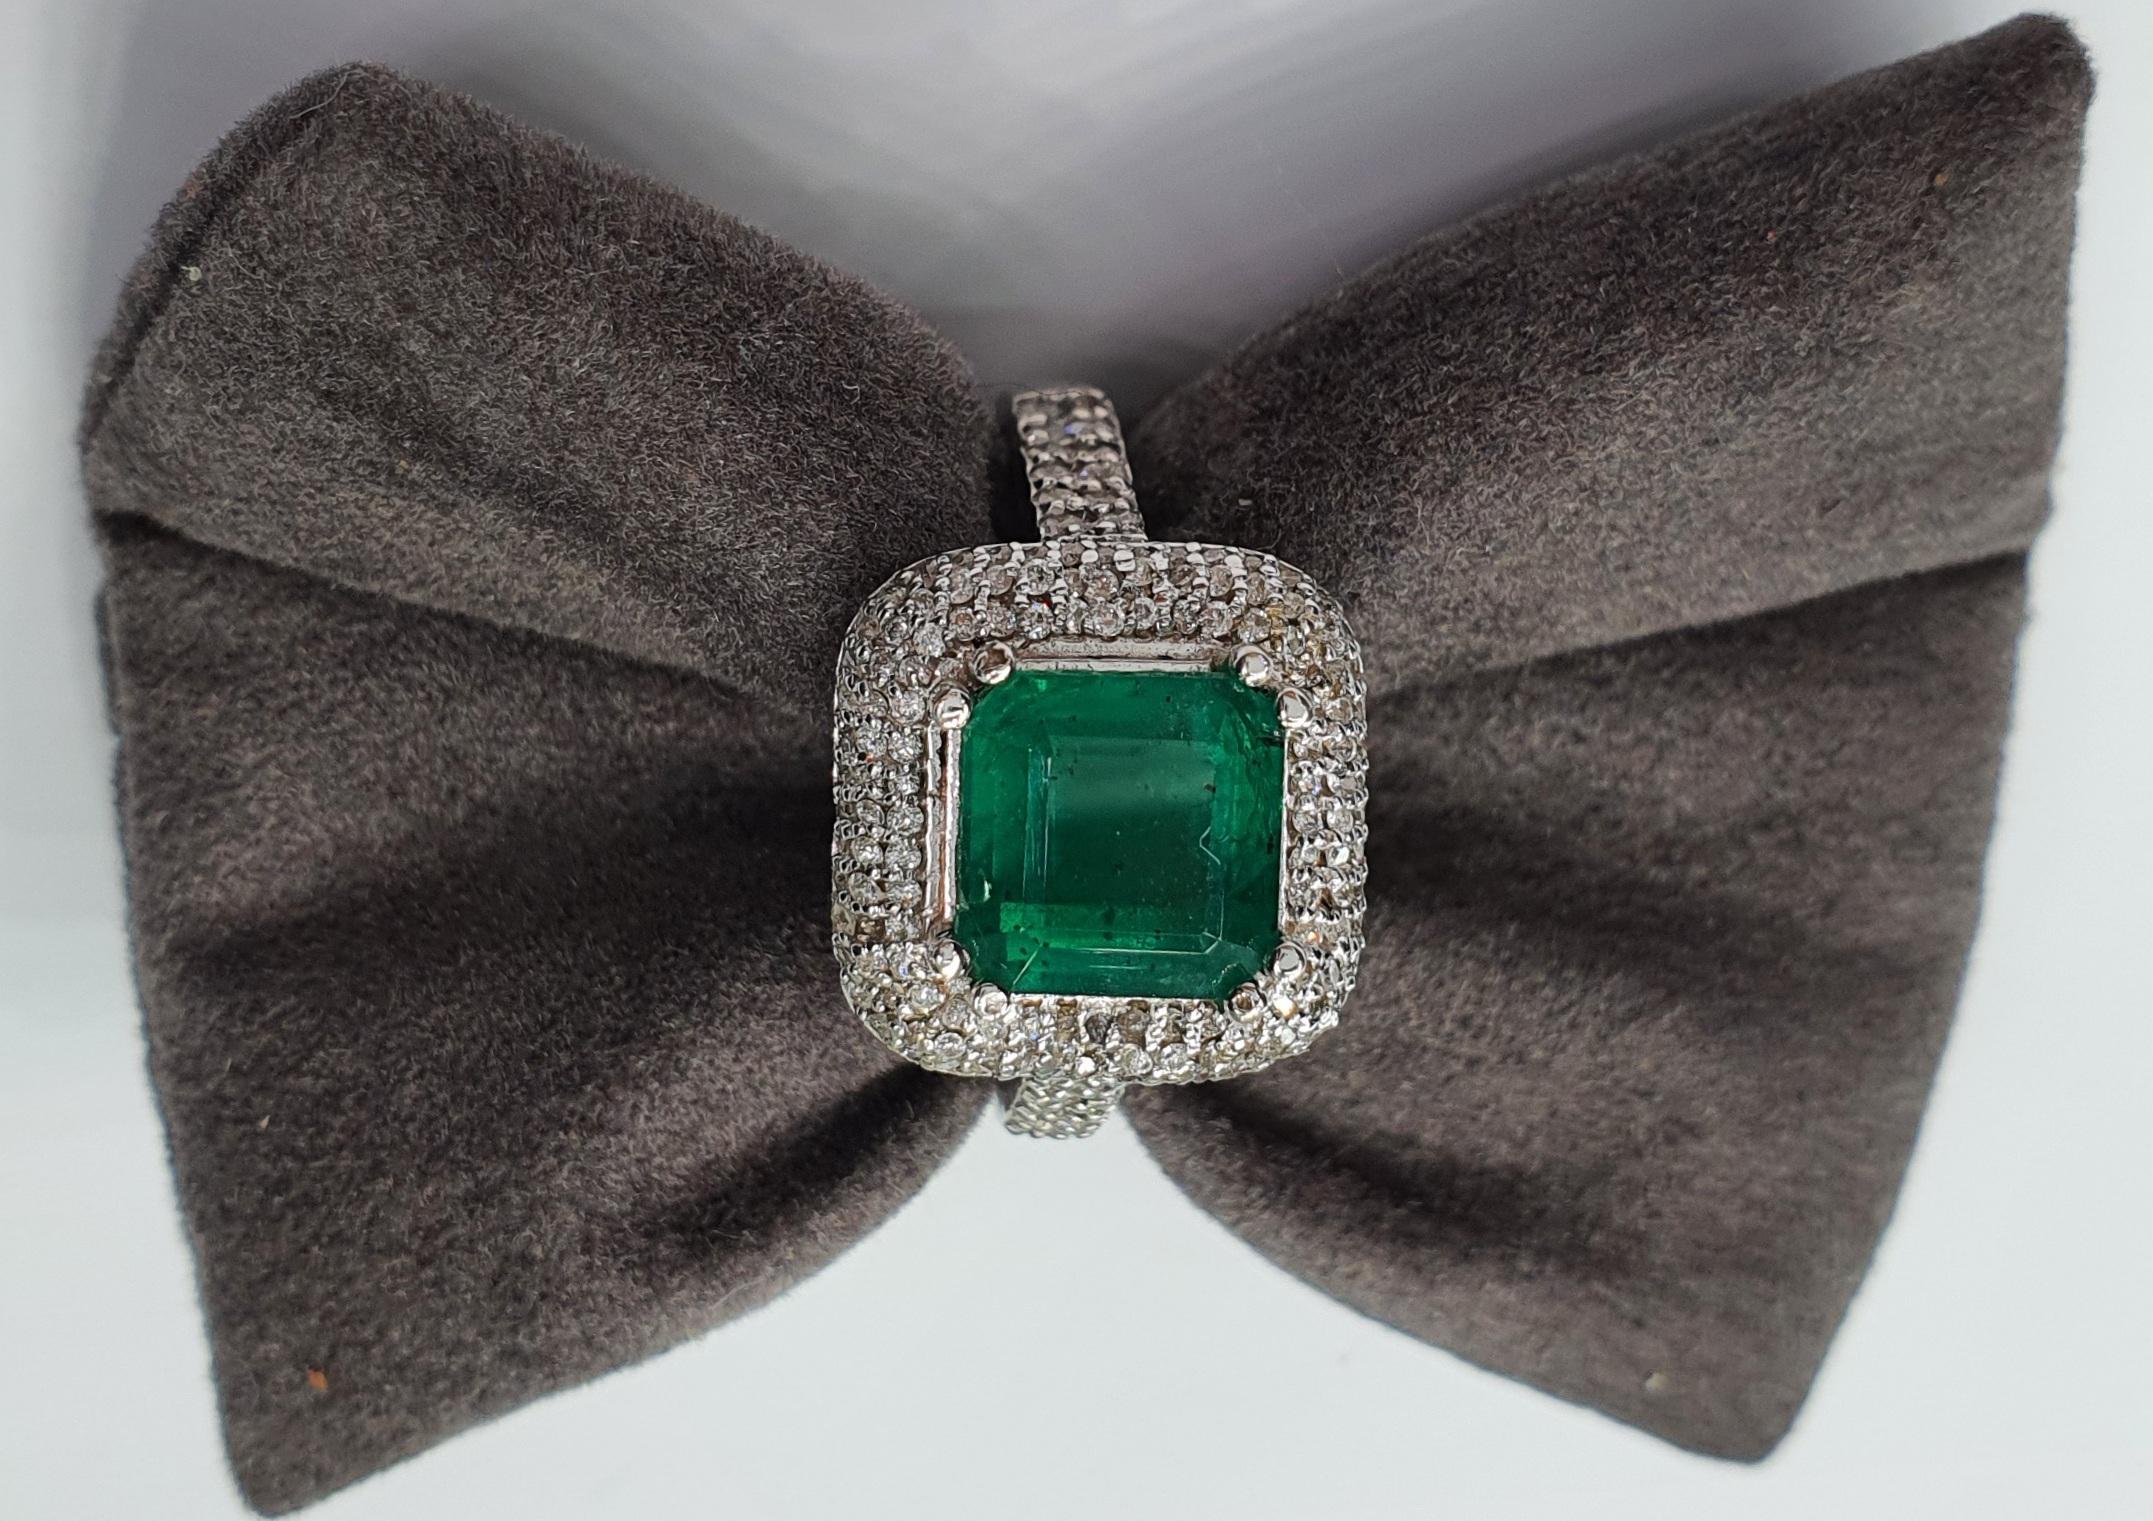 4.33 CTW Natural Emerald 14K Solid White Gold Diamond Ring


Item Type: Ring

Item Style: Engagement

Material: 14K White Gold

Mainstone: Emerald

Stone Color: Green

Stone Weight: 3.08 Carat

Stone Shape: Emerald
Stone Quantity: 1

Stone